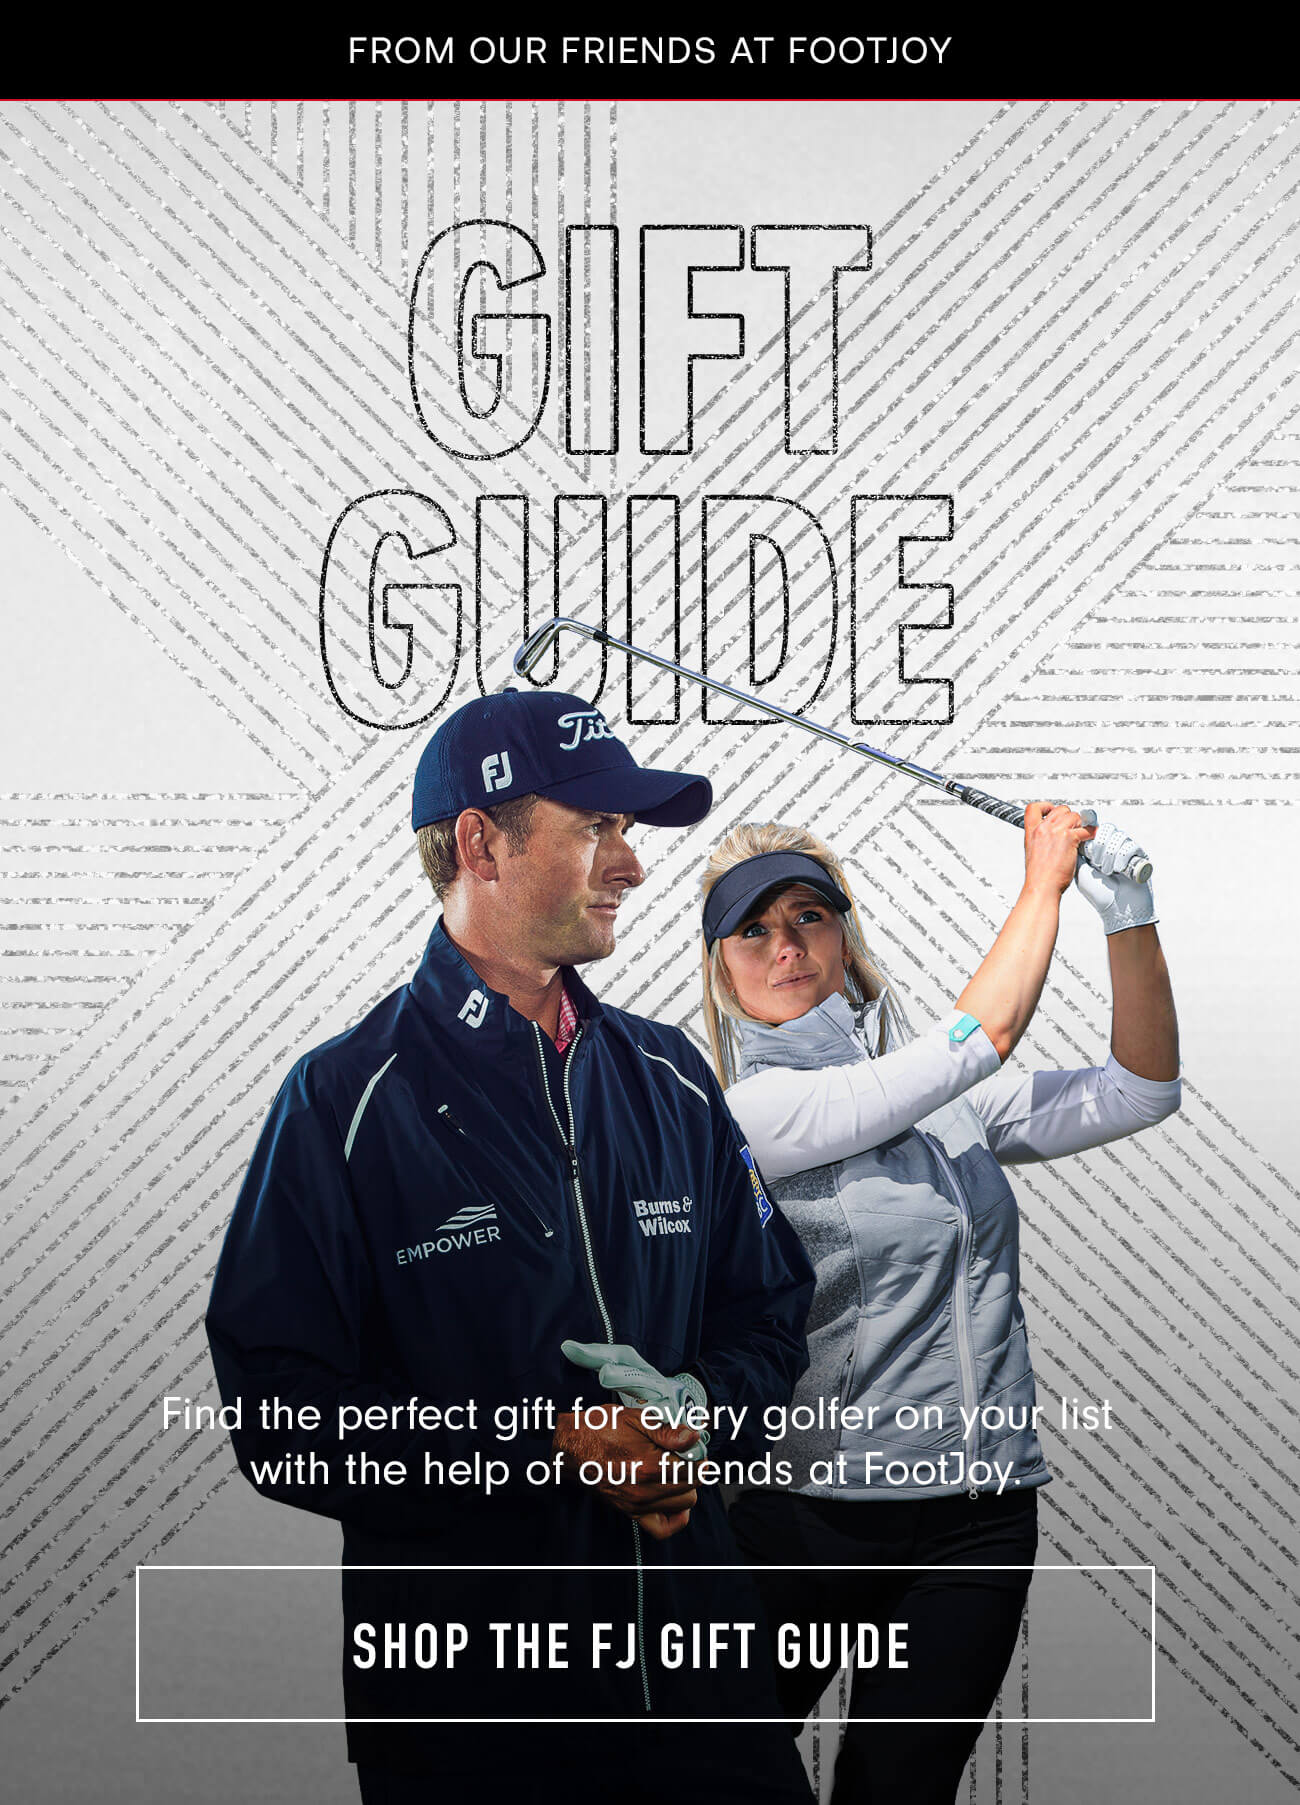 FJ HOLIDAY GIFT GUIDE